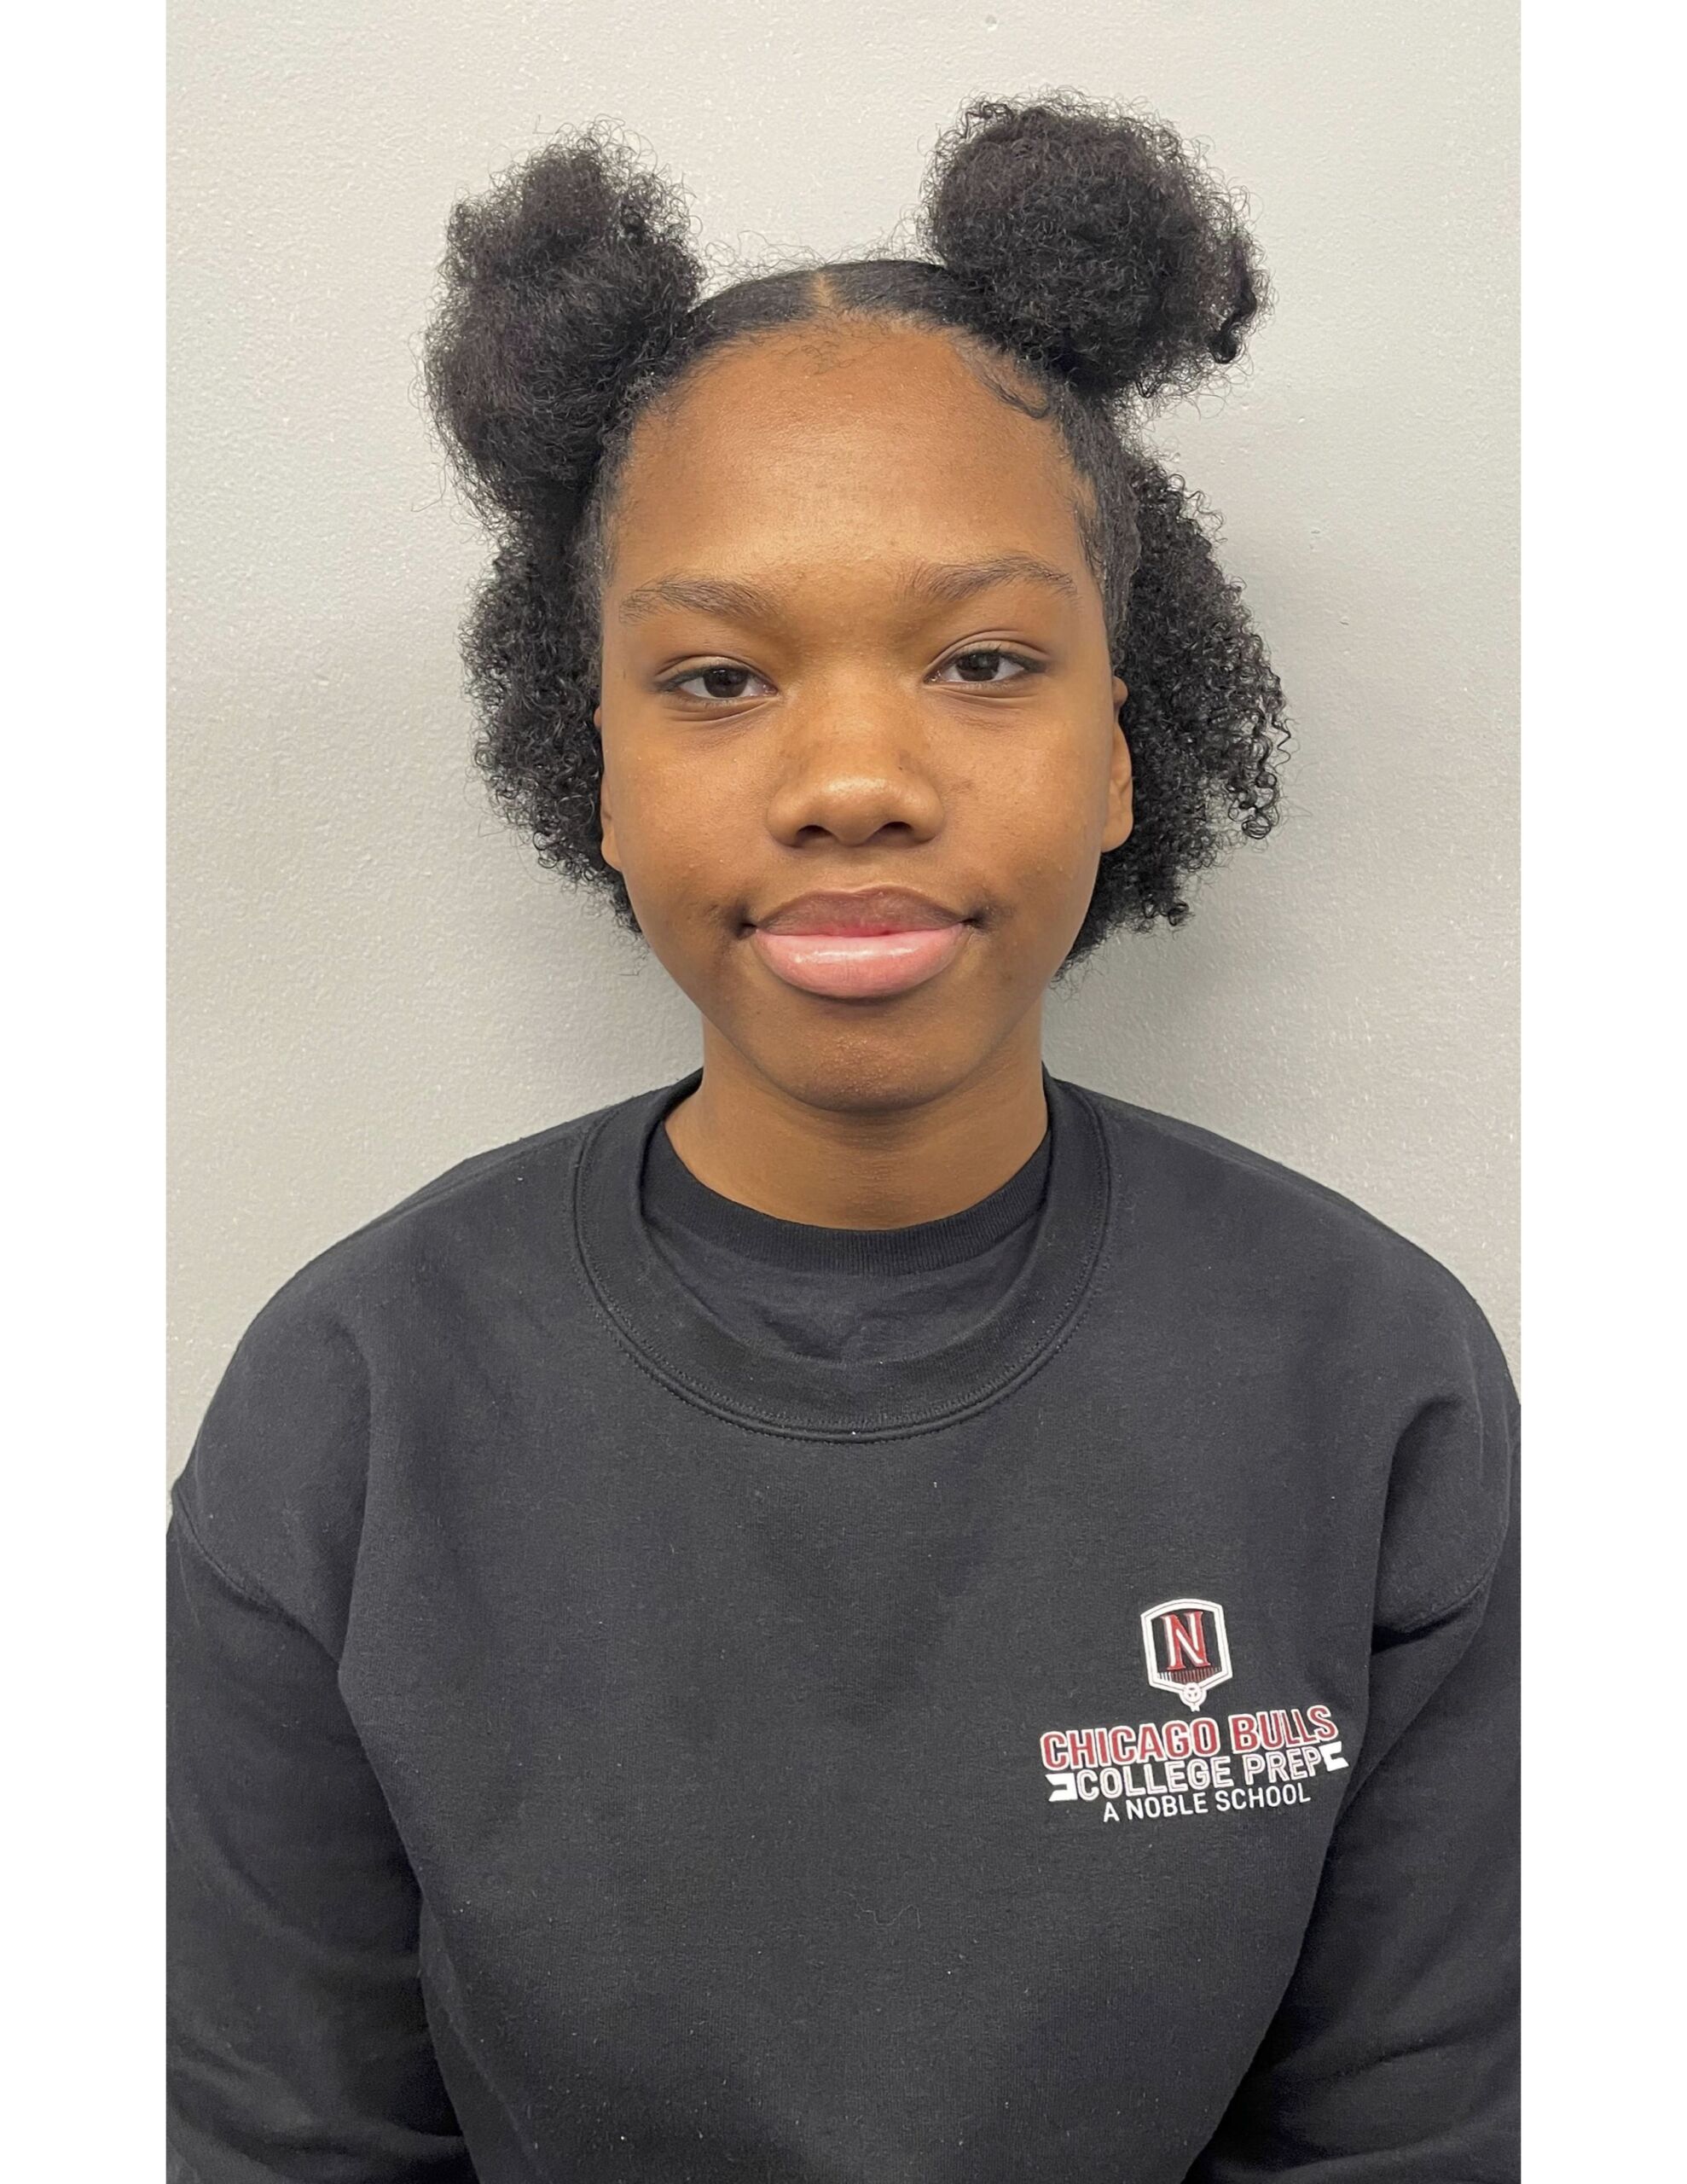 Photo shows a headshot of Madison Welch, a student at Chicago Bulls College Prep. She is a young Black woman with medium-length hair put up into two buns. She is wearing a black sweatshirt with the Bulls Prep logo on it.